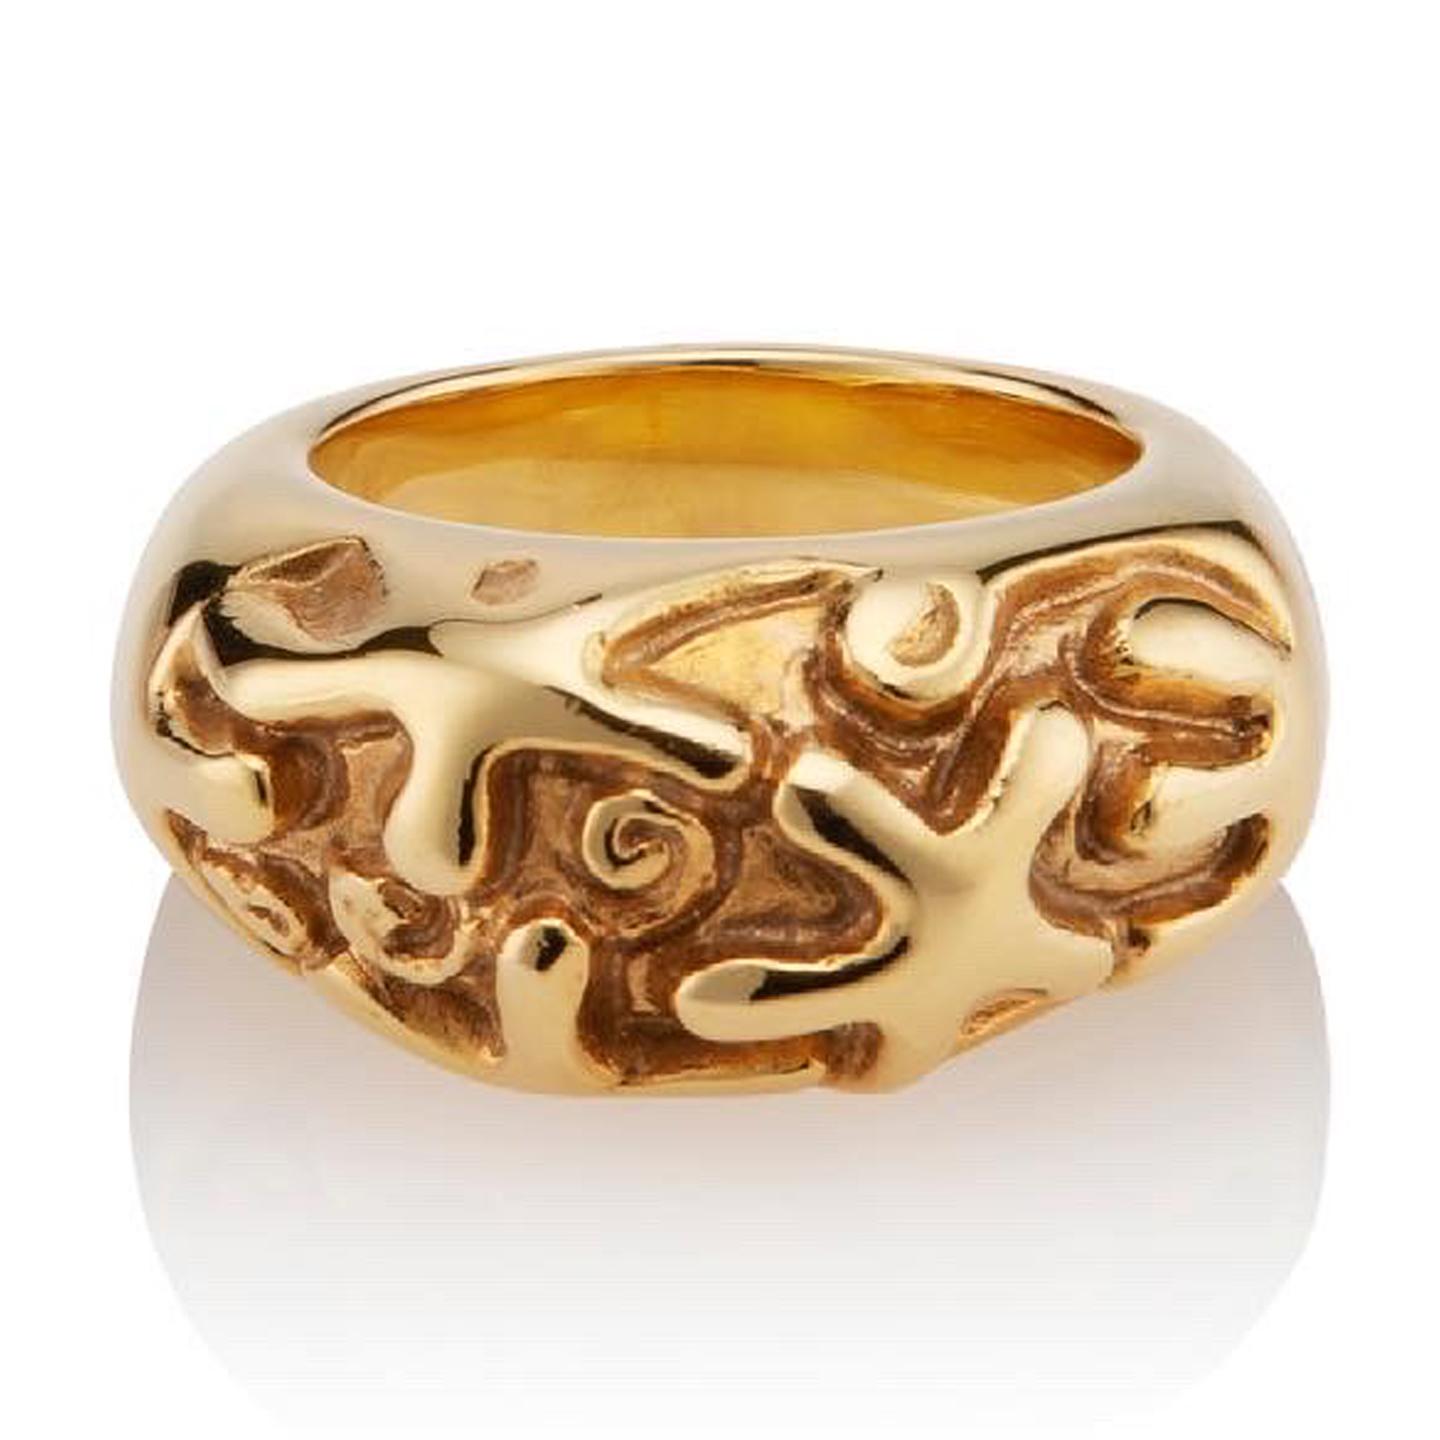 This Dome-shaped ring is embossed with a starfish another celestial symbol, represents infinite divine love, and is a truly elegant design in 22 Karat gold vermeil.

Jewelry designer Cheena Lee is a self-taught artisan whose pieces ingeniously